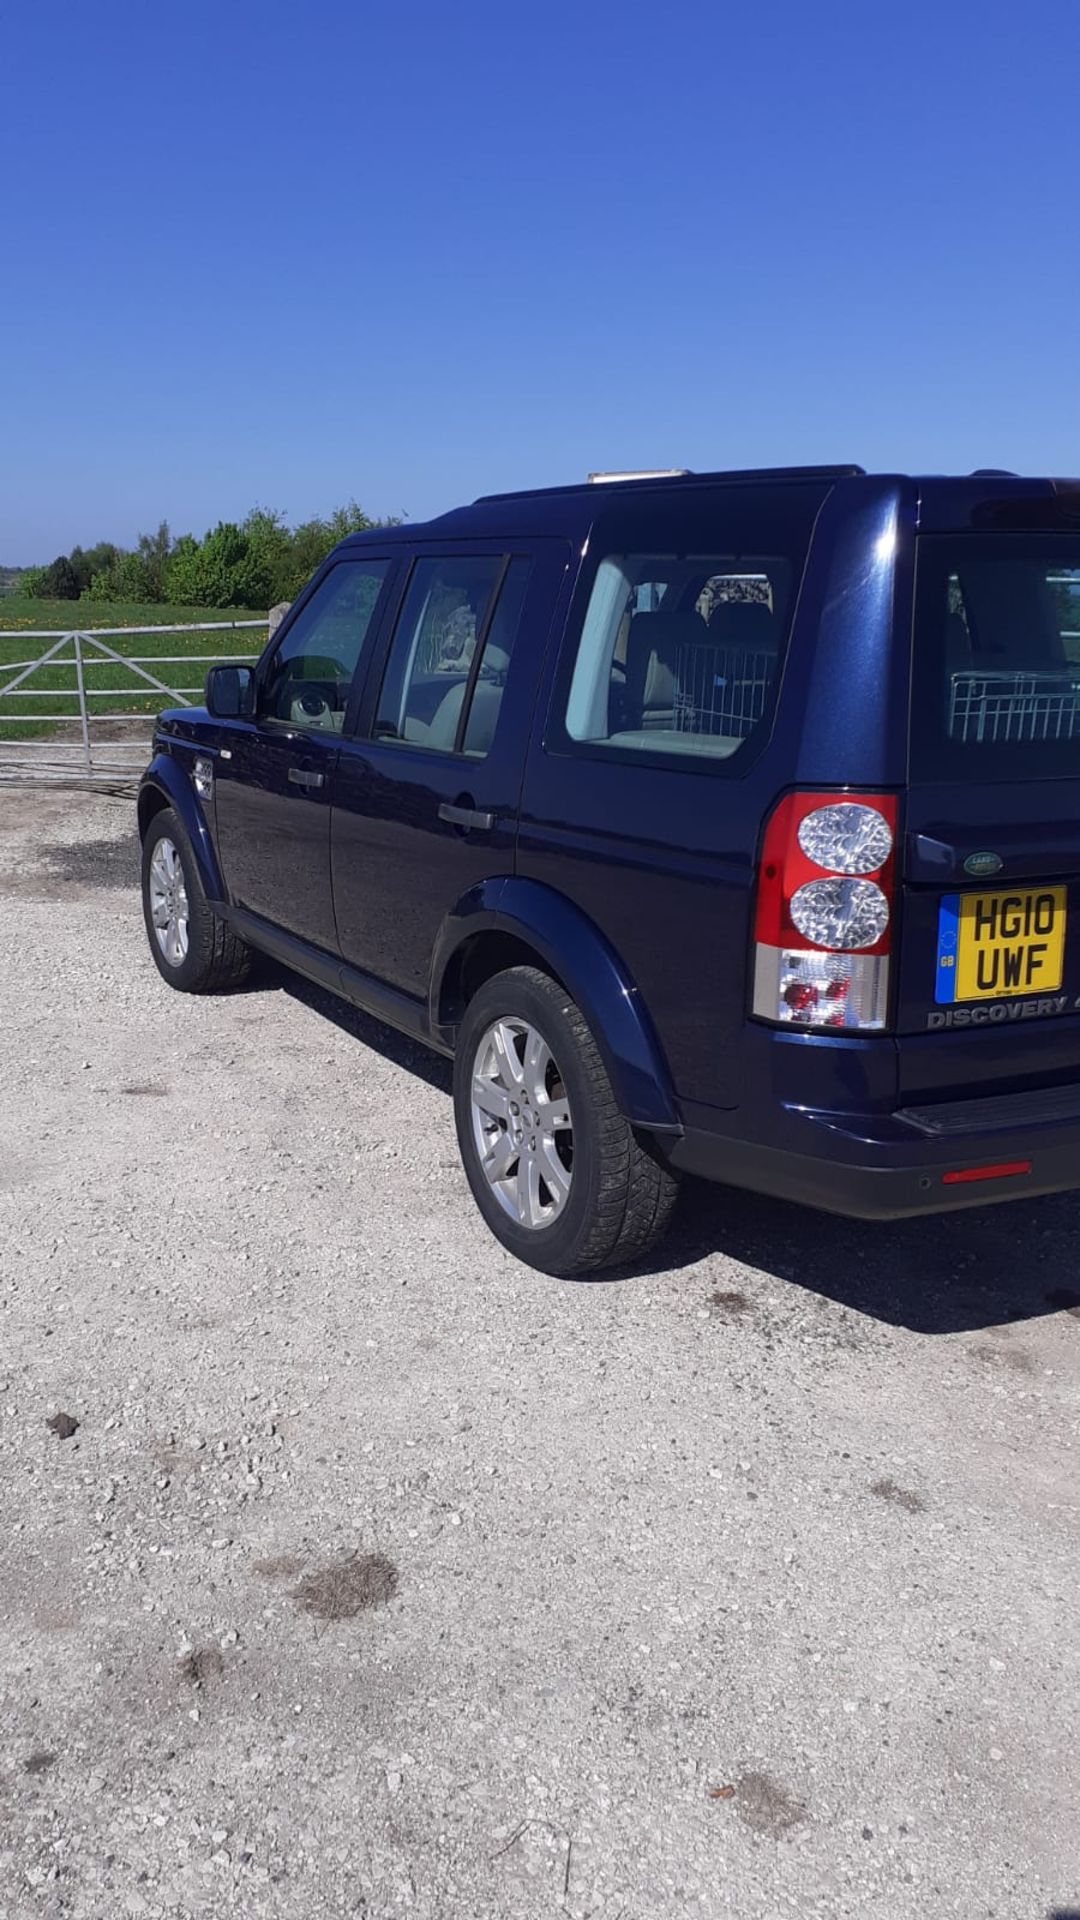 2010/10 REG LAND ROVER DISCOVERY XS TDV6 AUTOMATIC 3.0 DIESEL BLUE, SHOWING 0 FORMER KEEPERS - Image 2 of 3